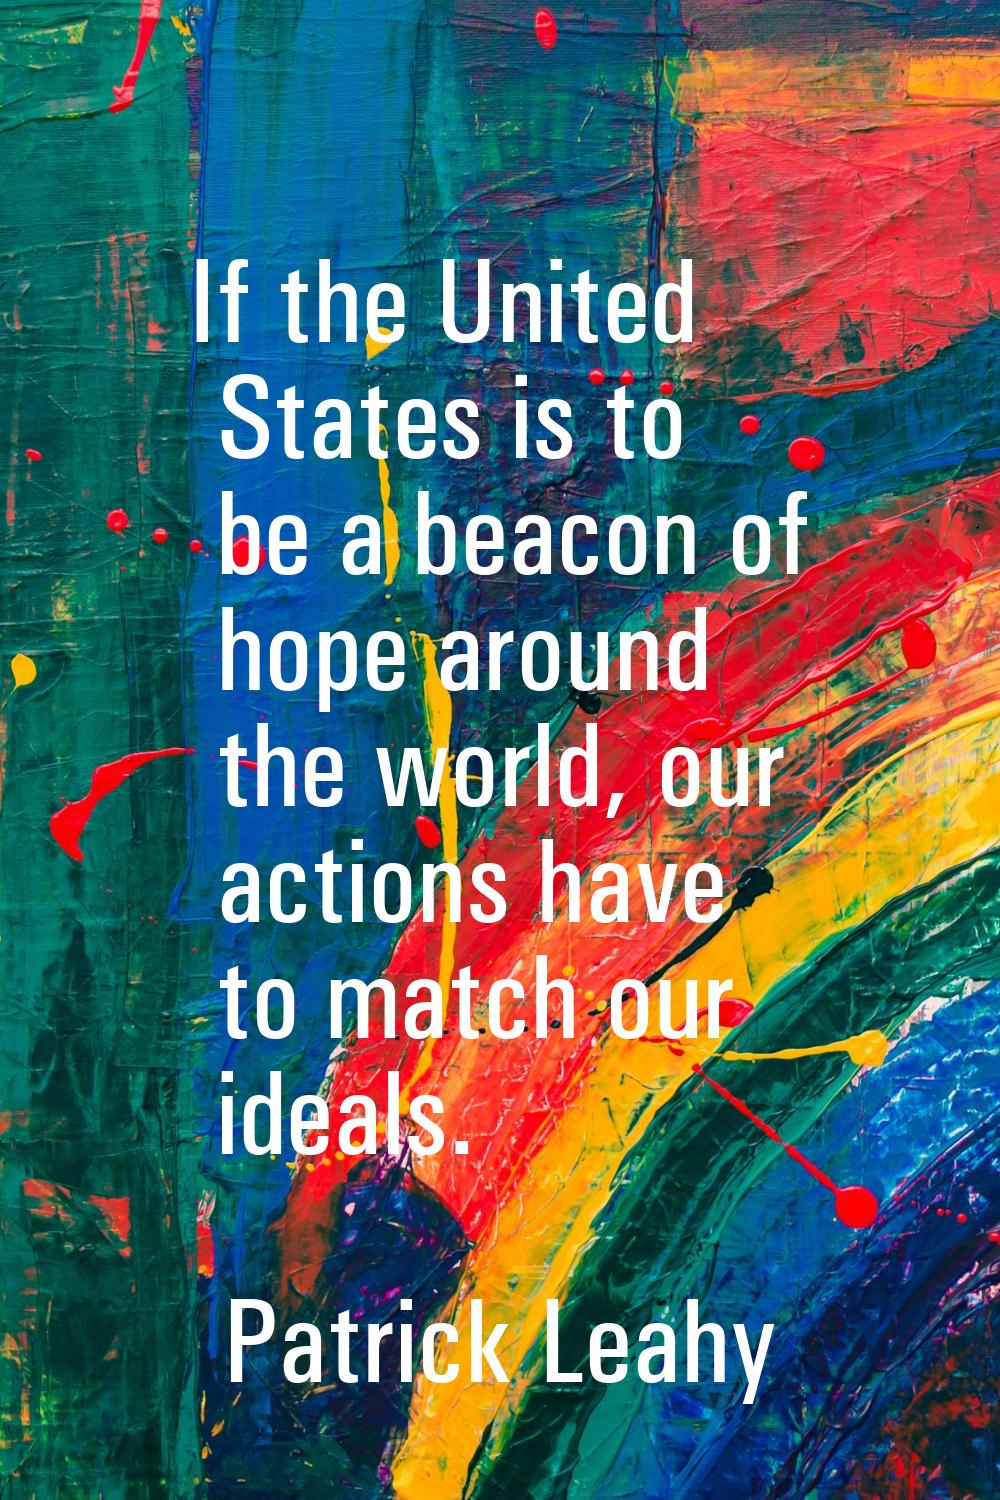 If the United States is to be a beacon of hope around the world, our actions have to match our idea